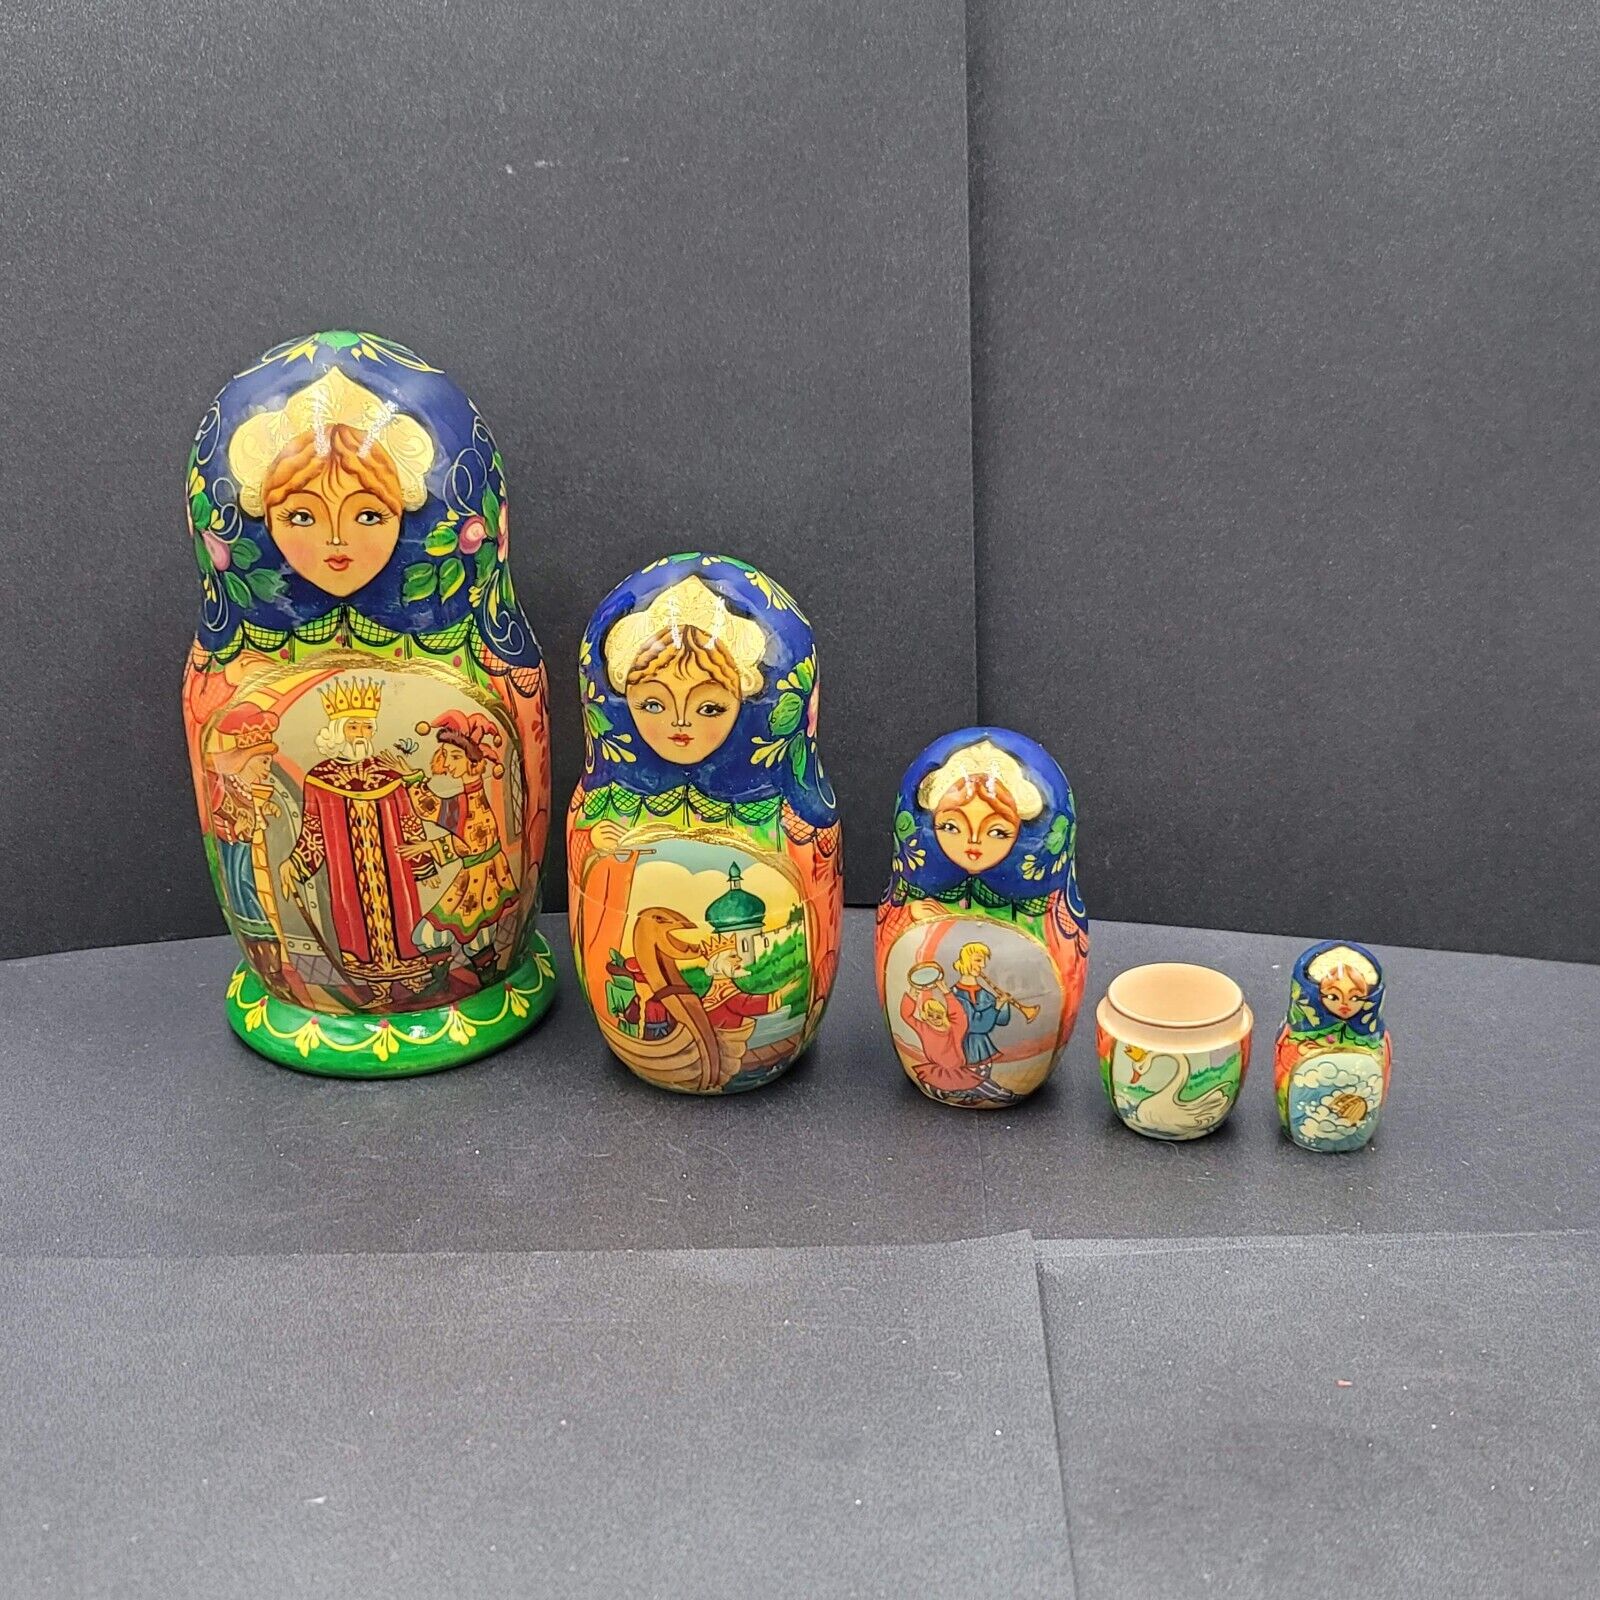 Vintage Set of USSR Russian Wooden Nesting Dolls AS IS Missing 1/2 of 1 Doll